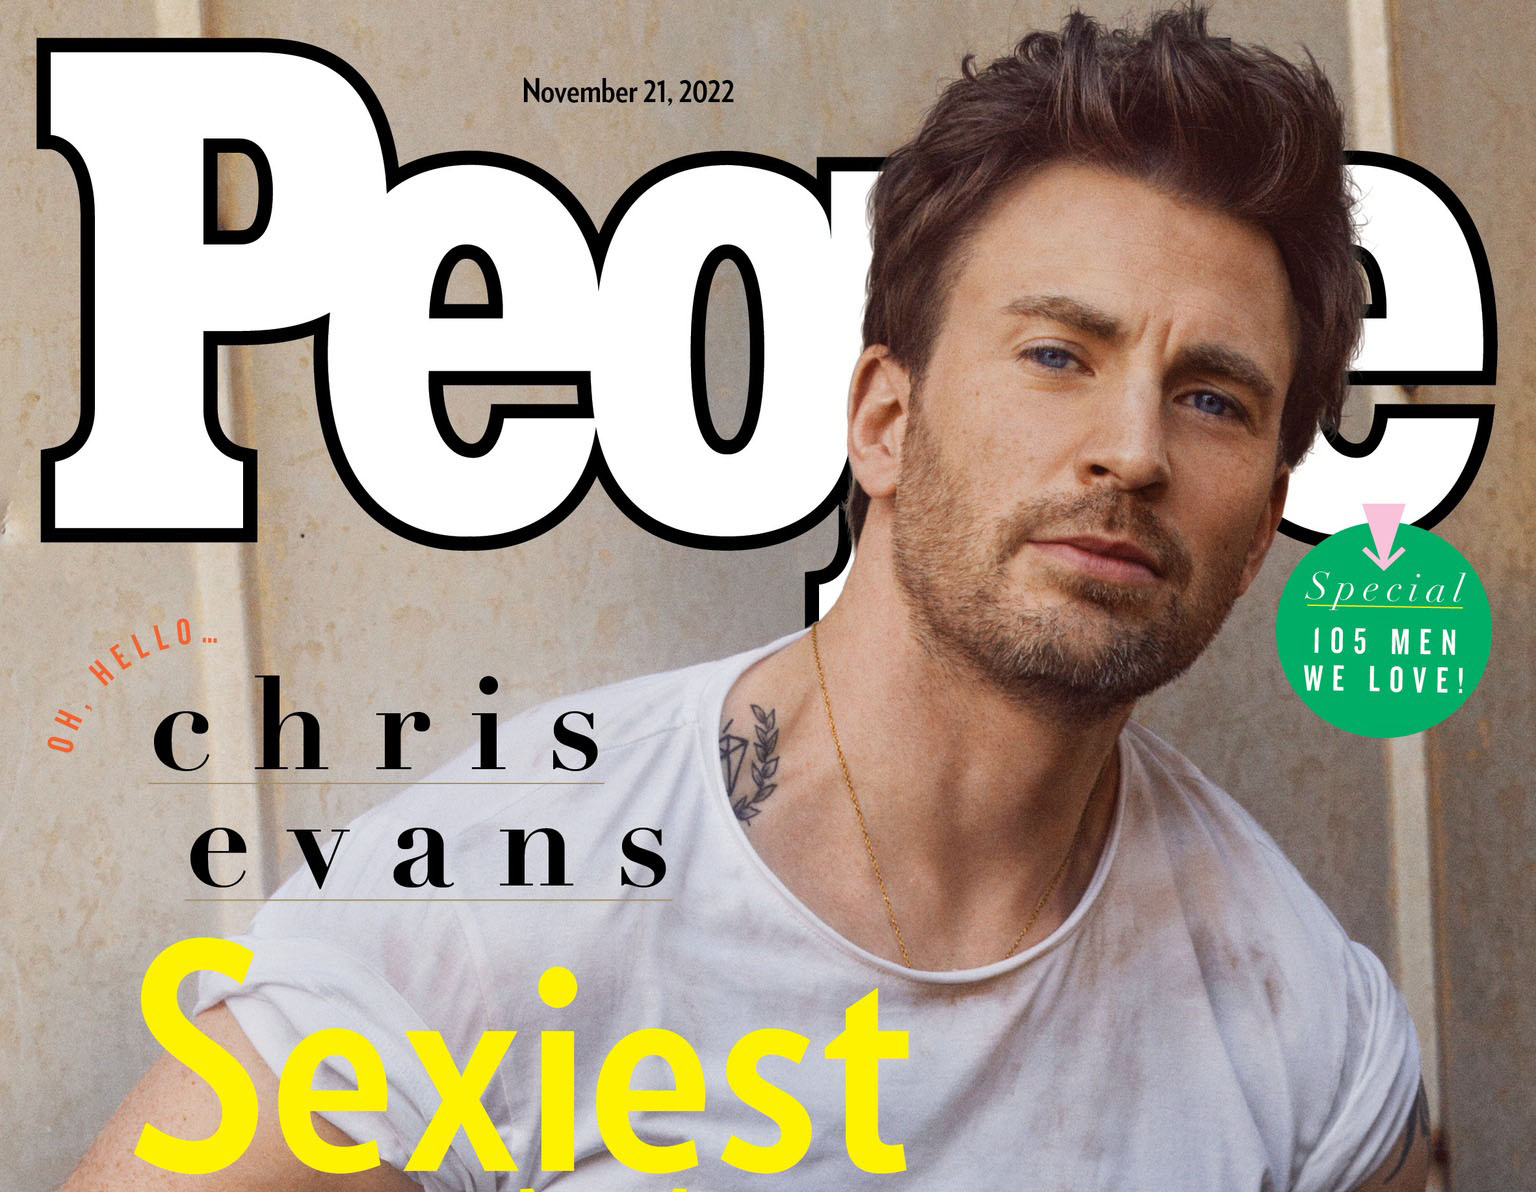 Chris Evans got the title of the sexiest man of the year!